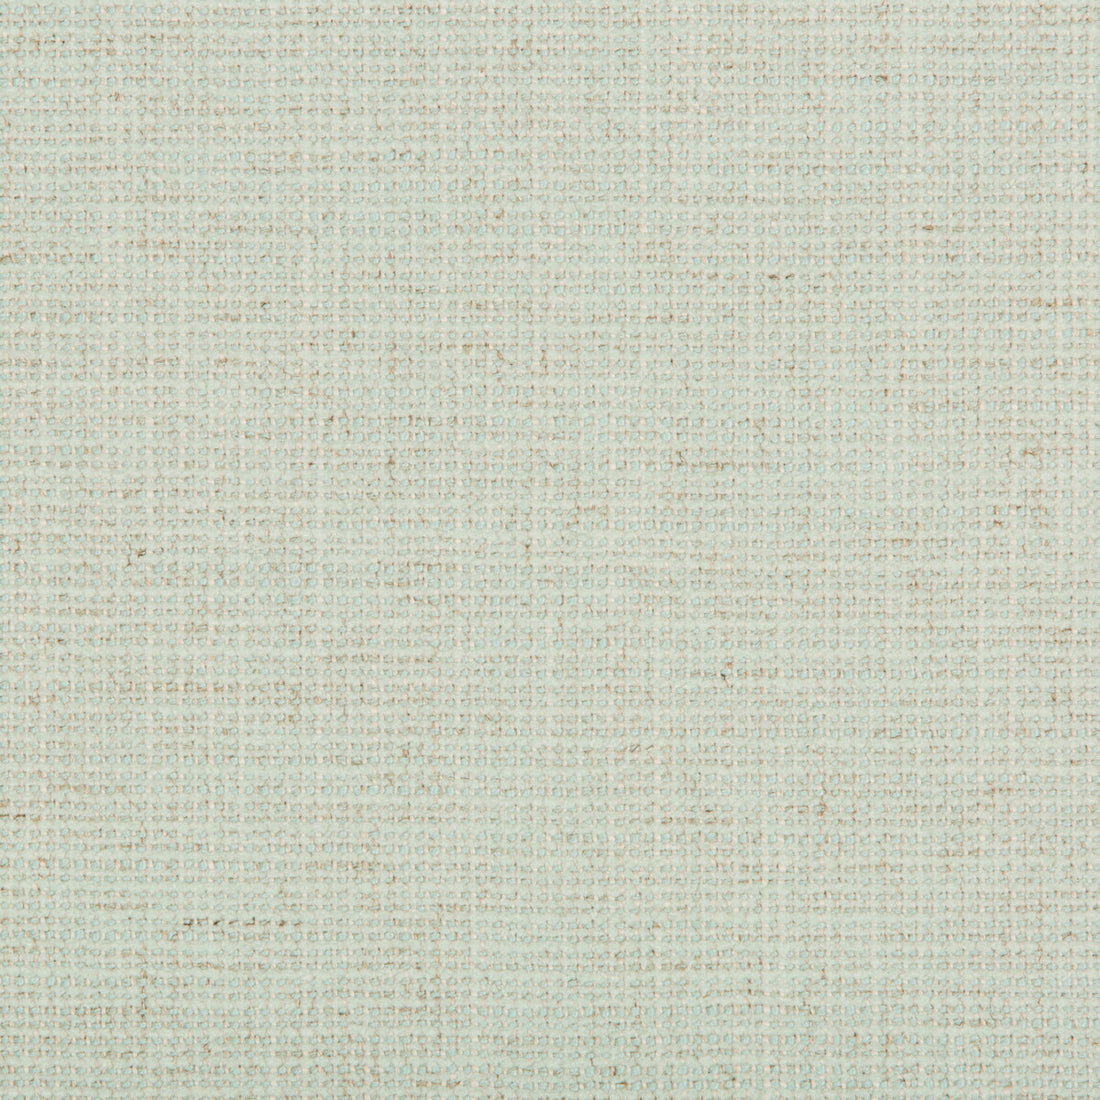 Kravet Smart fabric in 35395-13 color - pattern 35395.13.0 - by Kravet Smart in the Performance Crypton Home collection